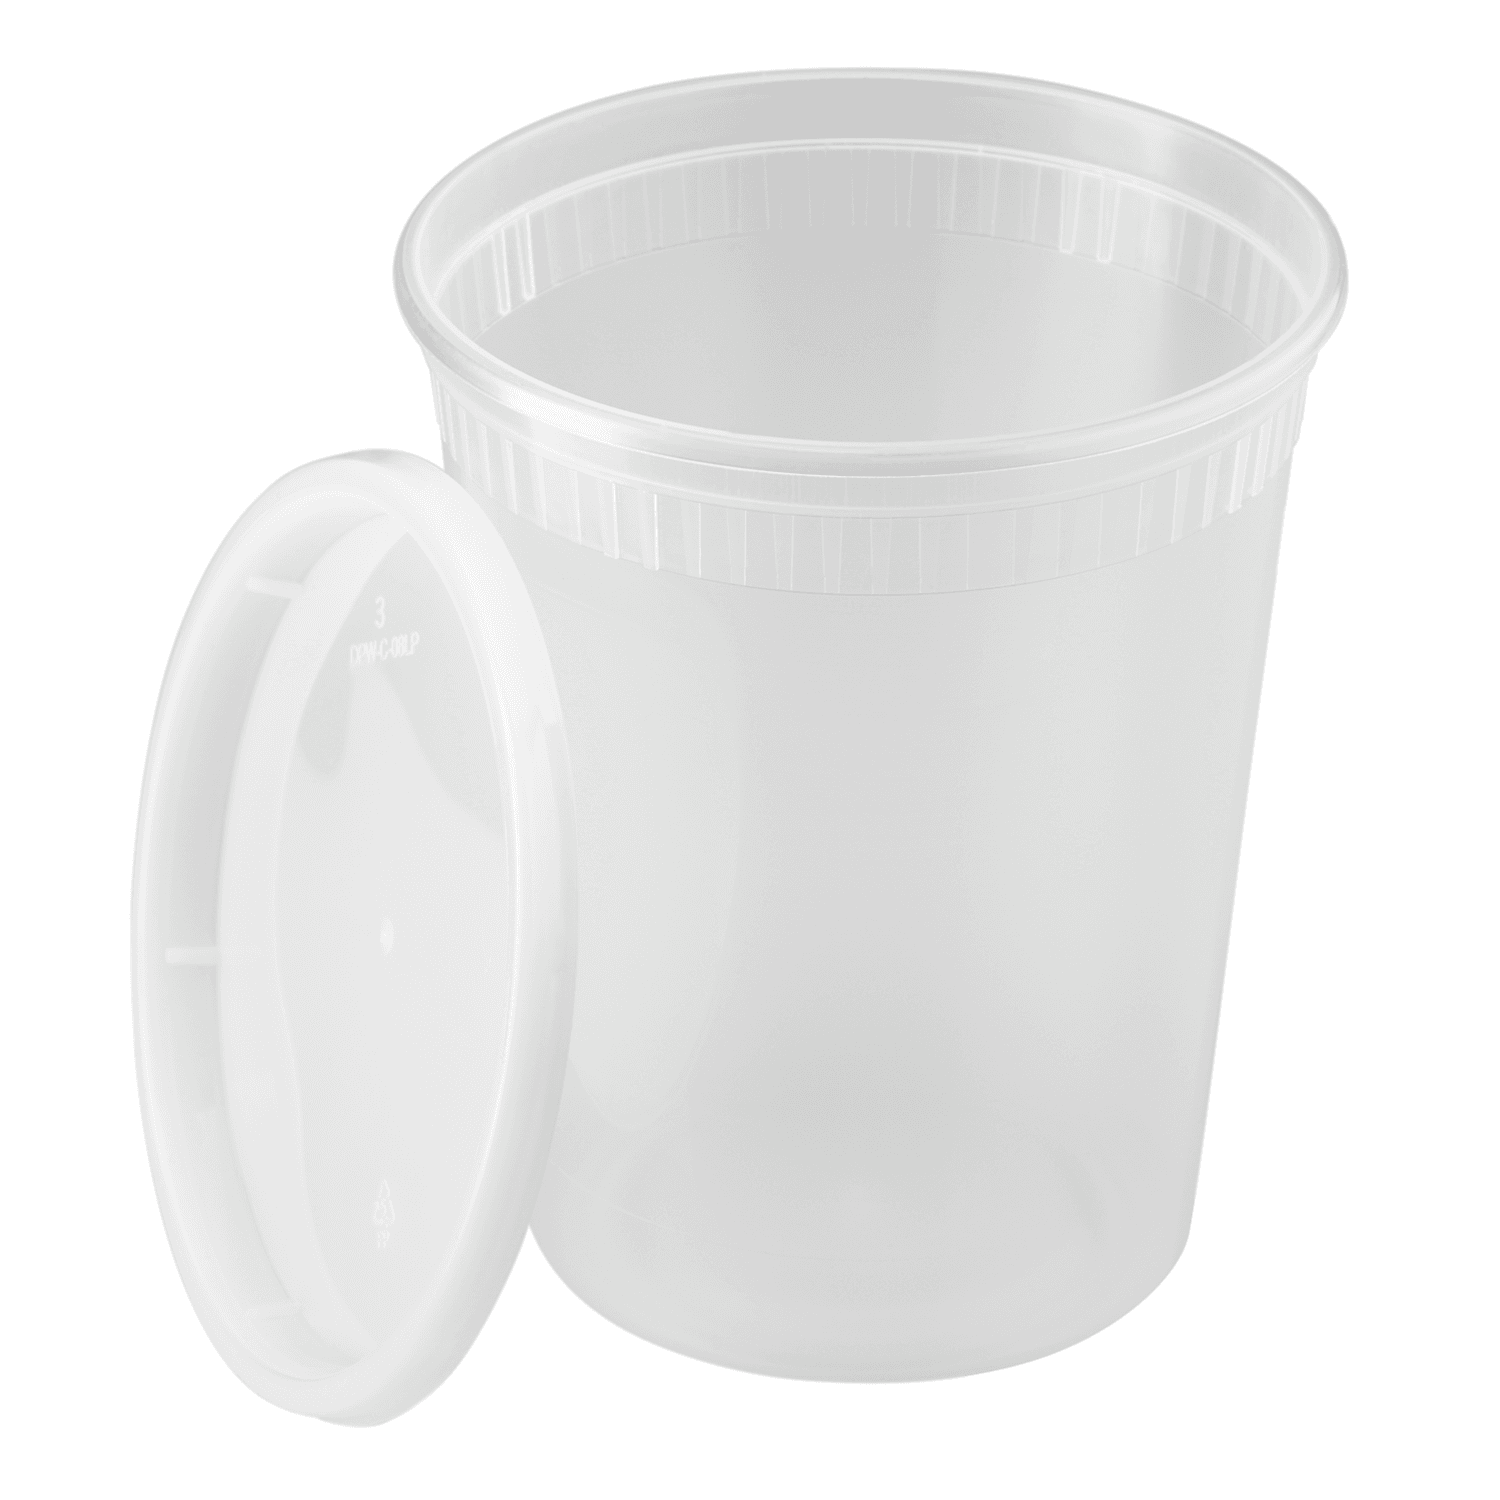 Clear Karat 32oz PP Plastic Injection Molded Deli Containers & Lids with lid next to container